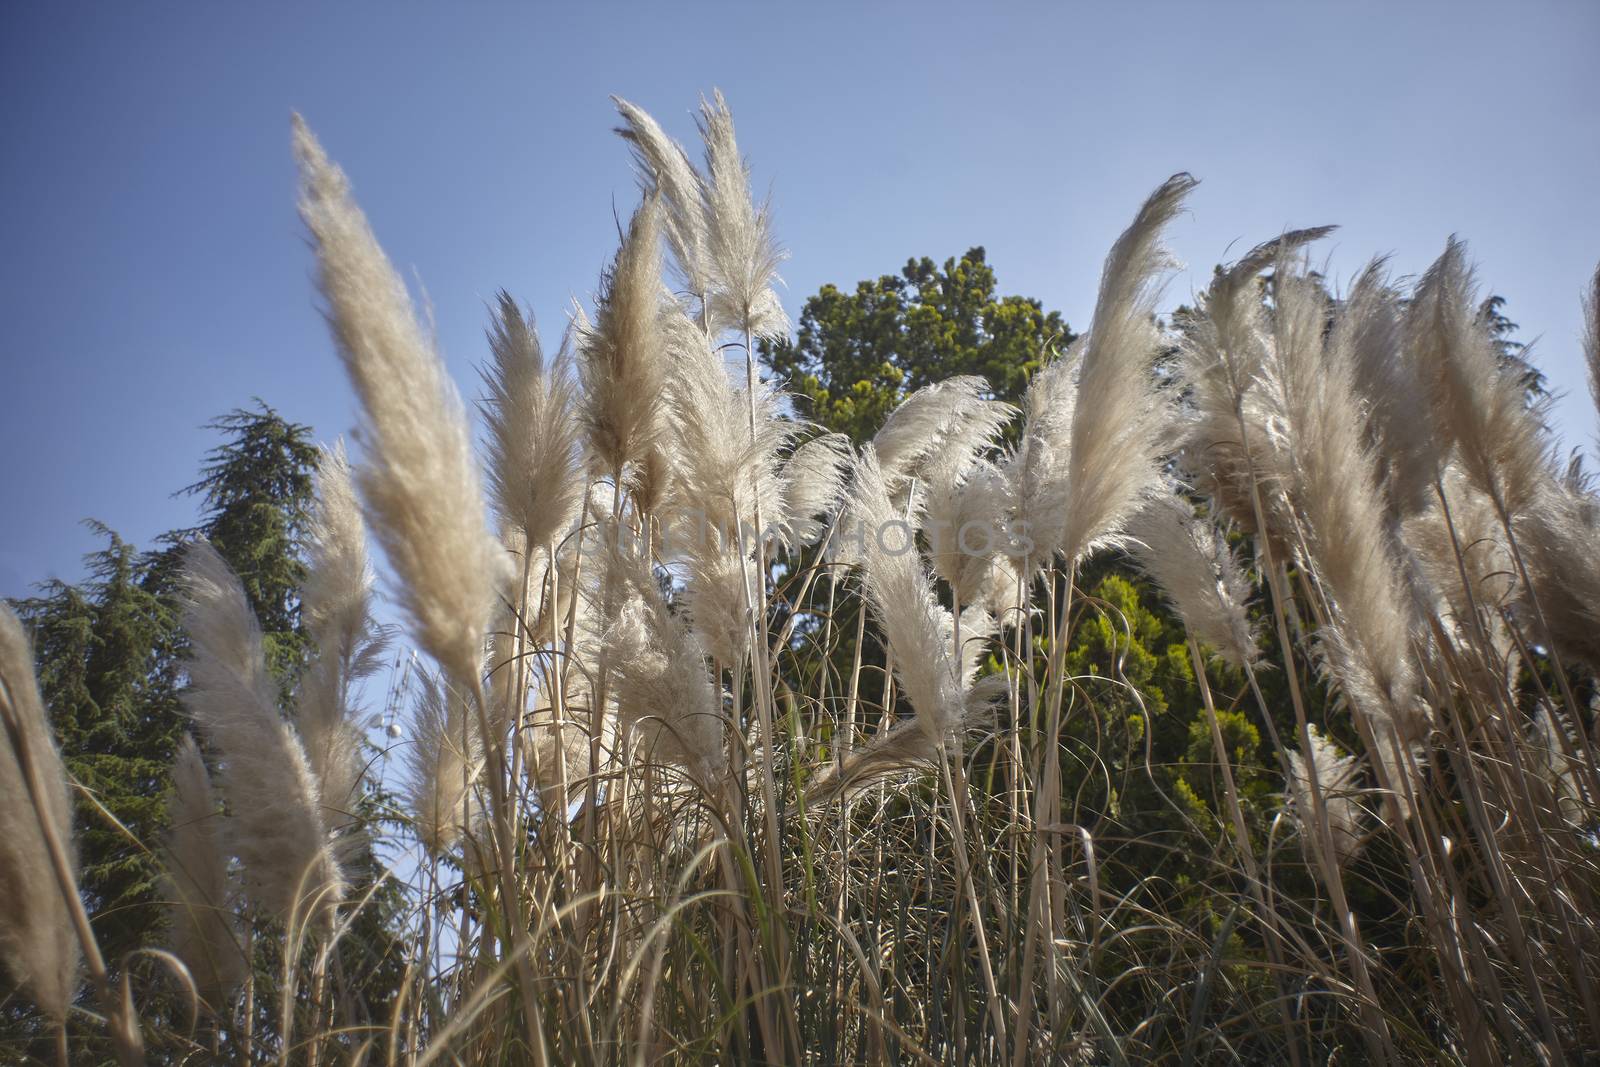 Pampas grass bush surrounded by a garden with other trees in the background.